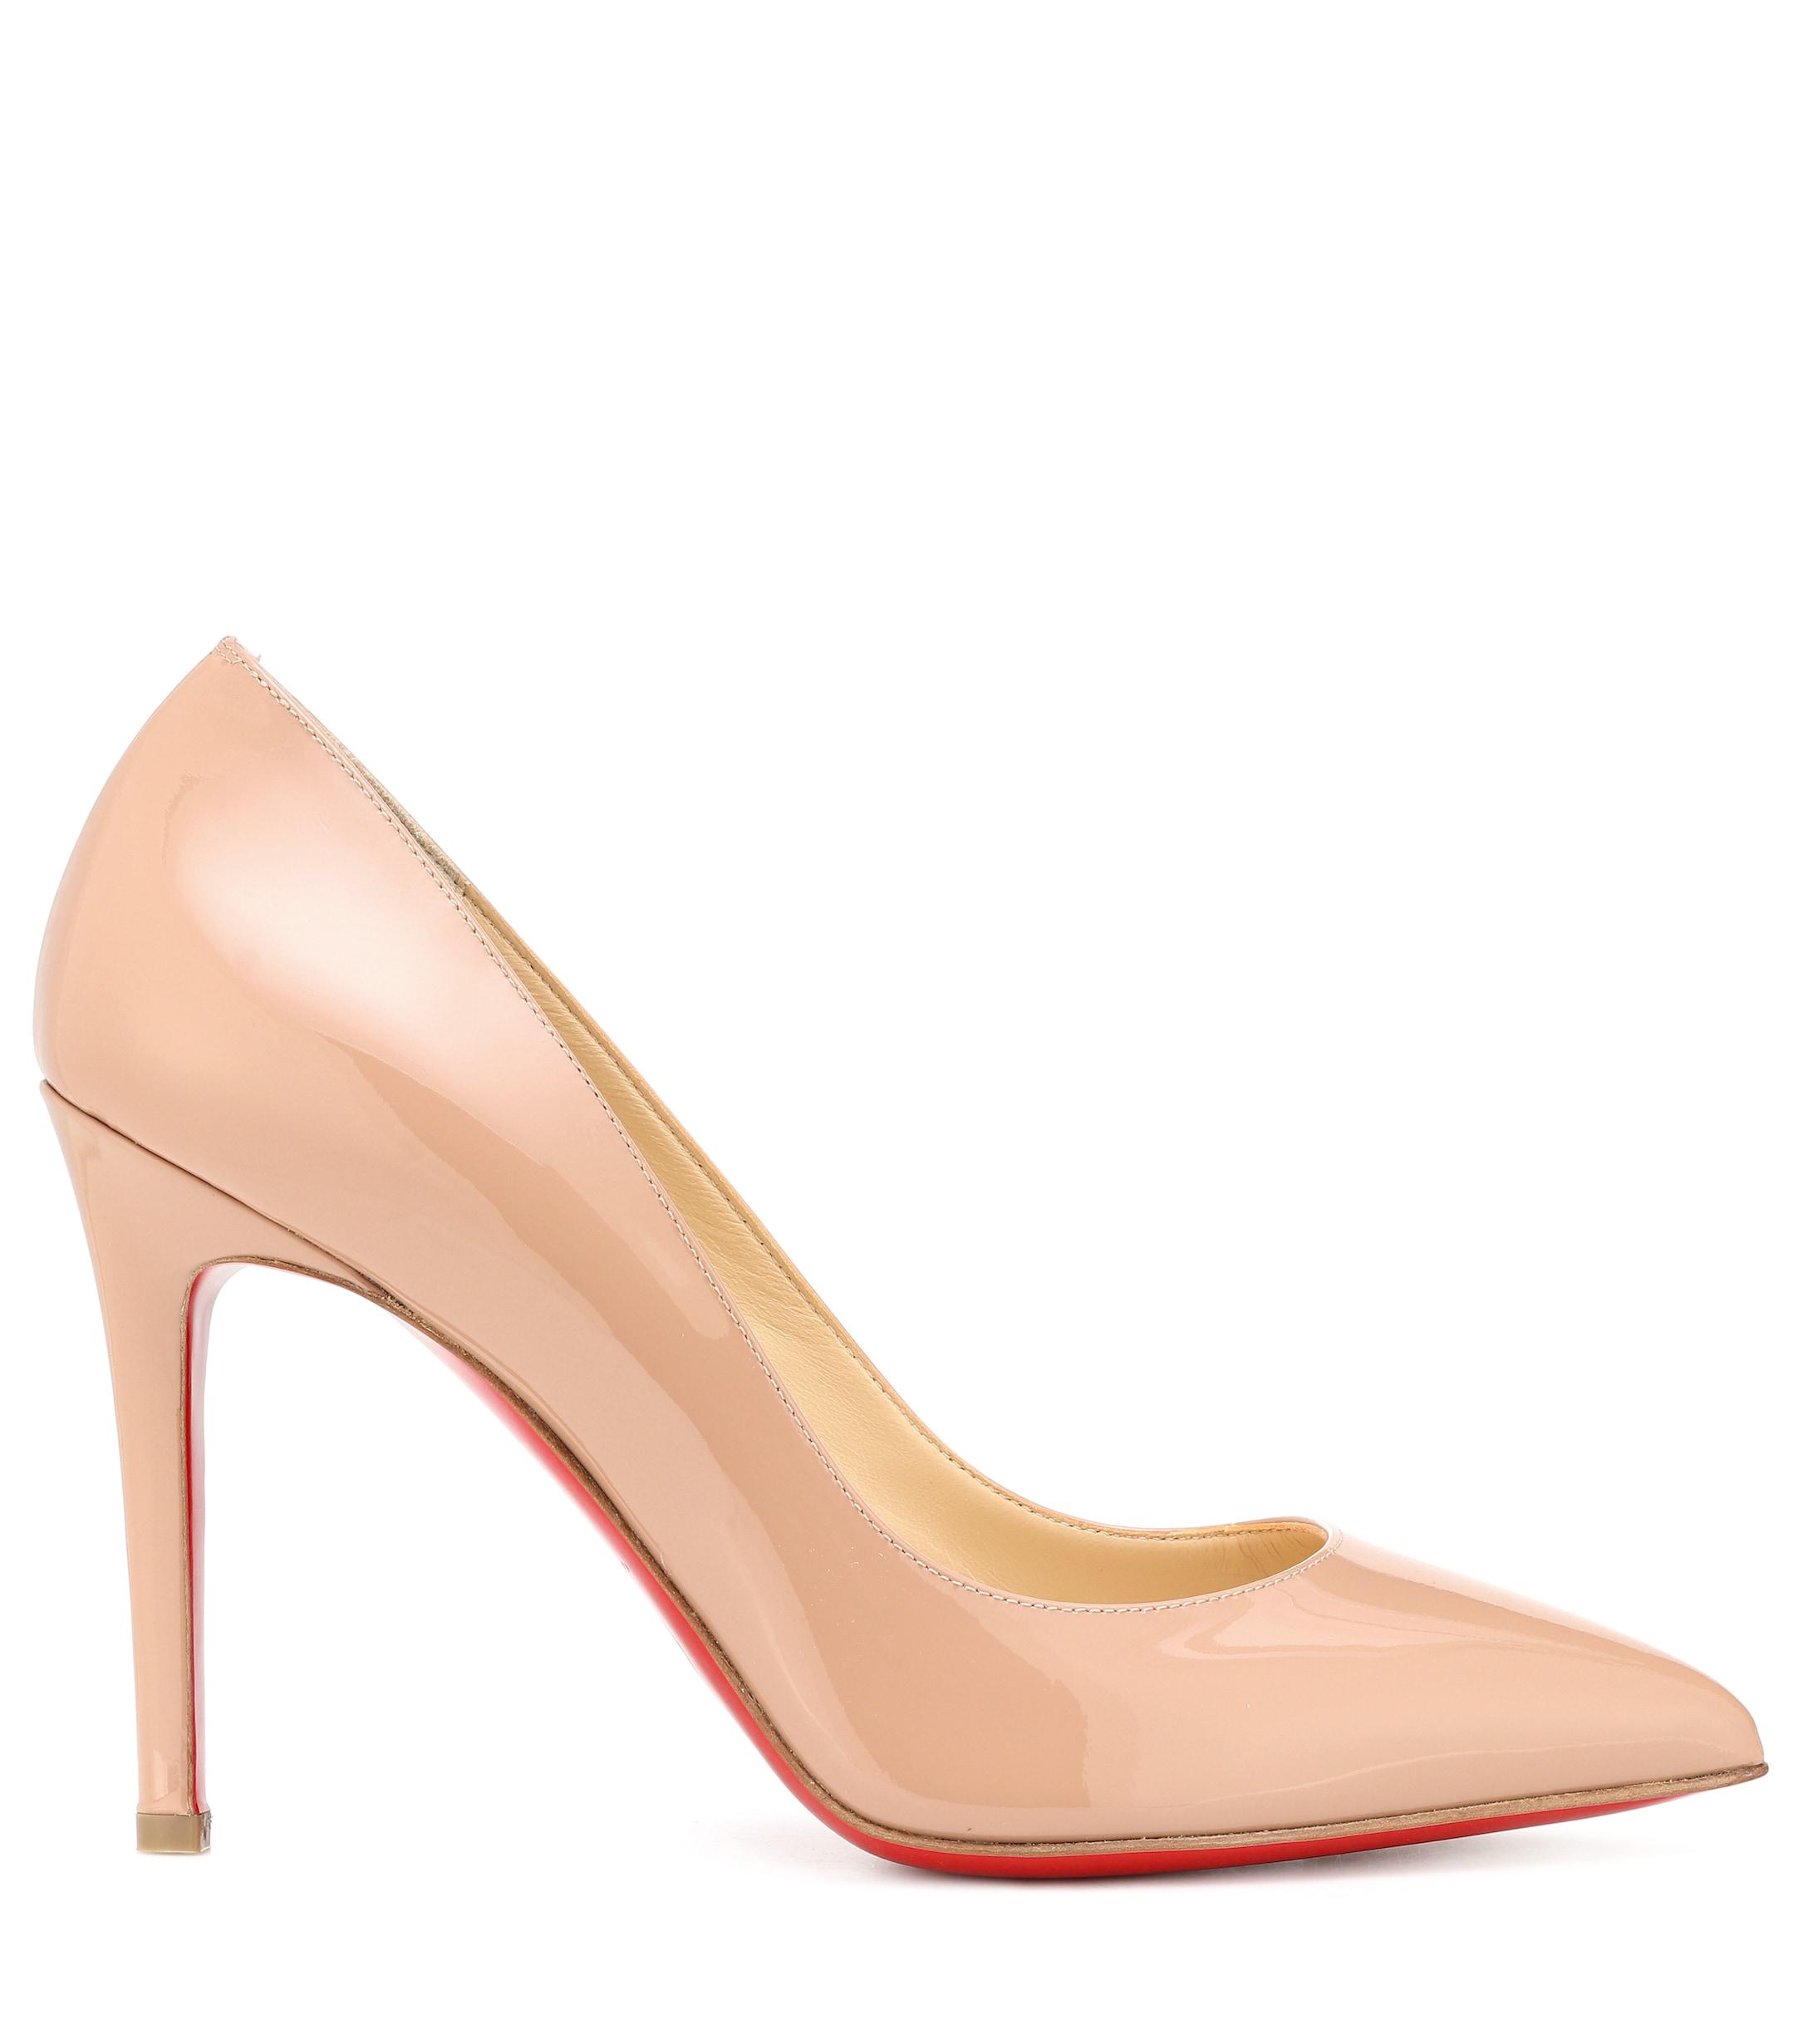 Christian Louboutin Pigalle 100 Patent Leather Pumps in Nude (Natural ...